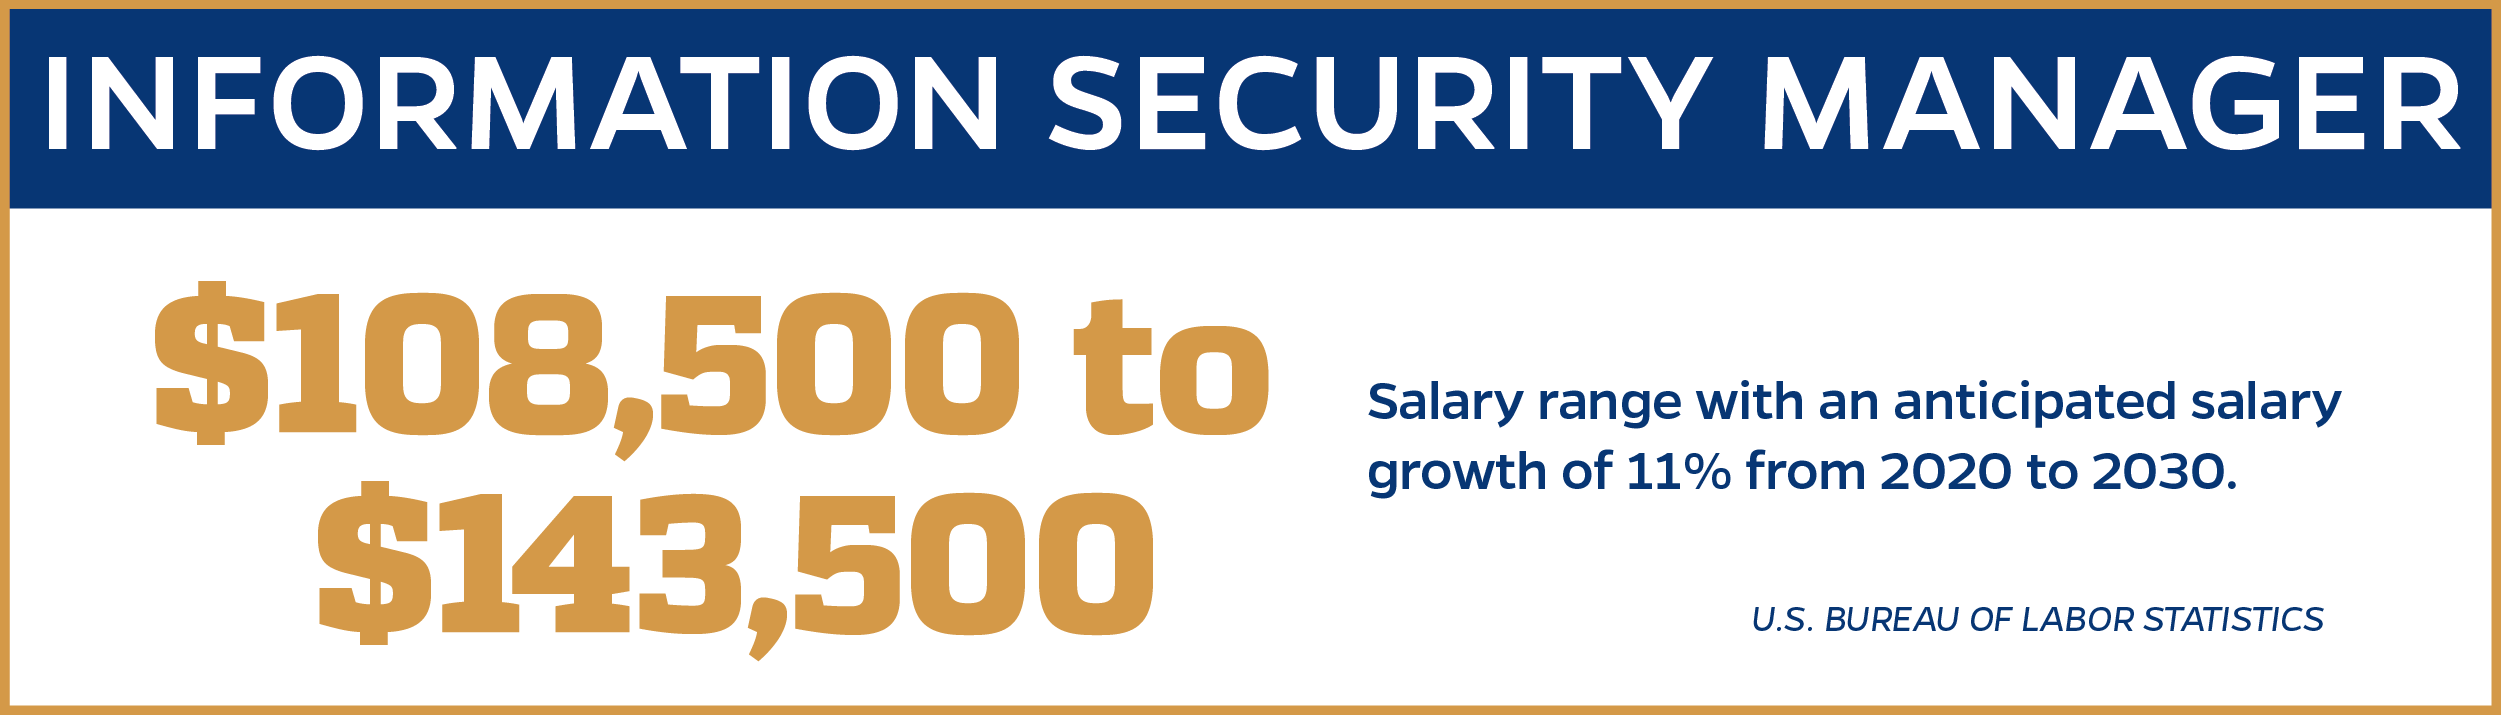 Information Security manager inforgraphic- $108,500 to $143,500 salary range with an anticipated salary growth of 11% from 2020 to 2030.